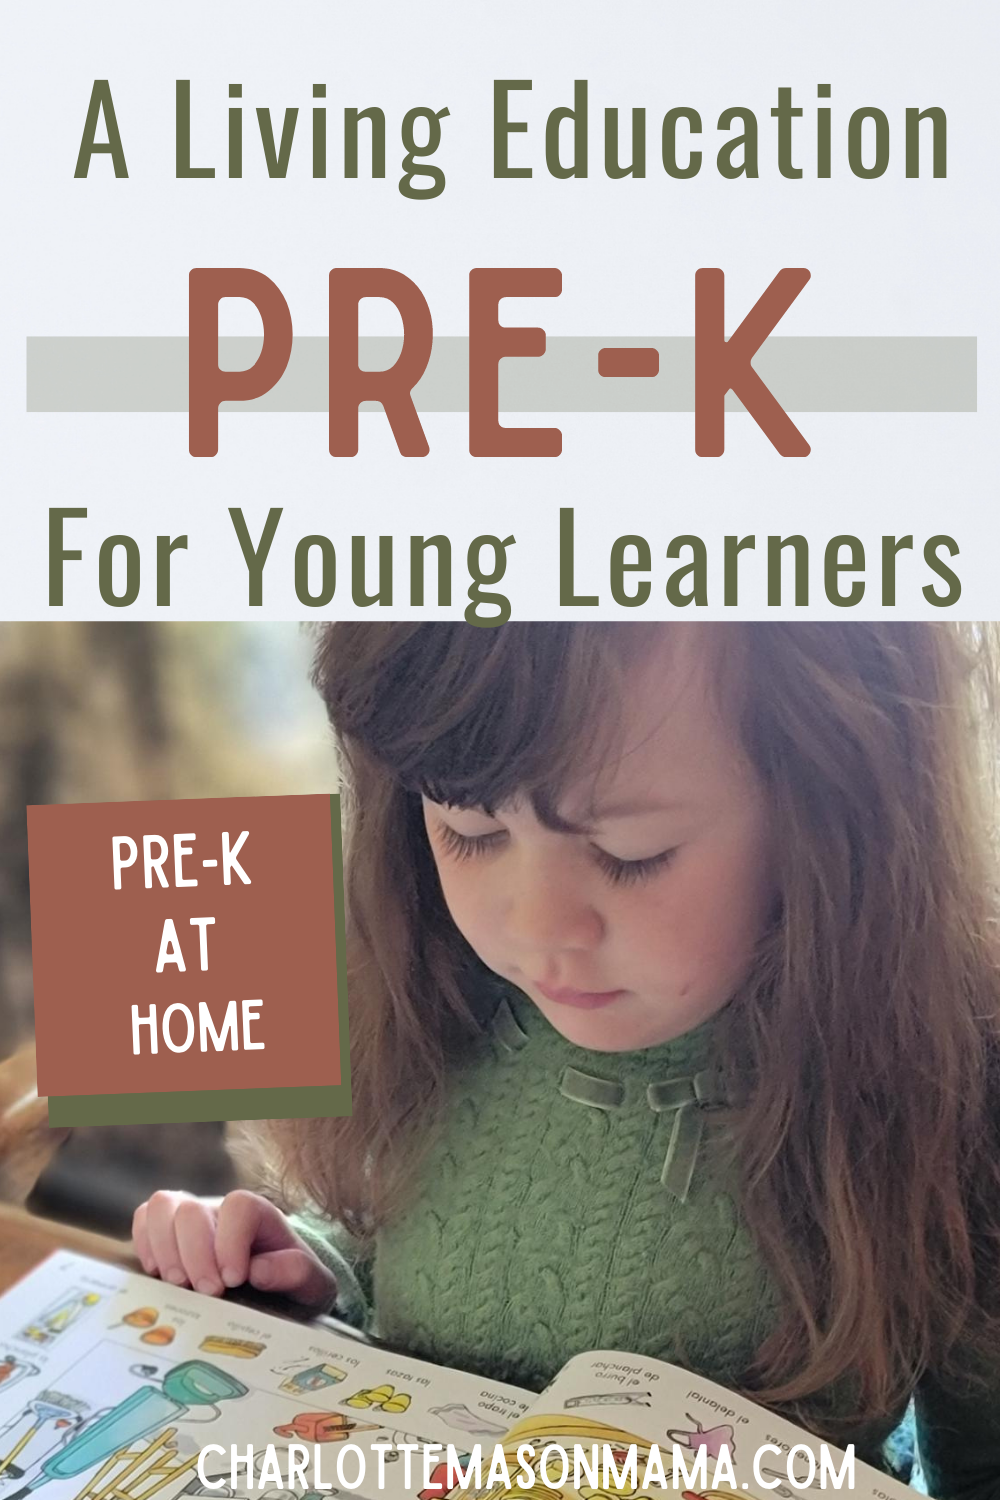 Pre-K at Home